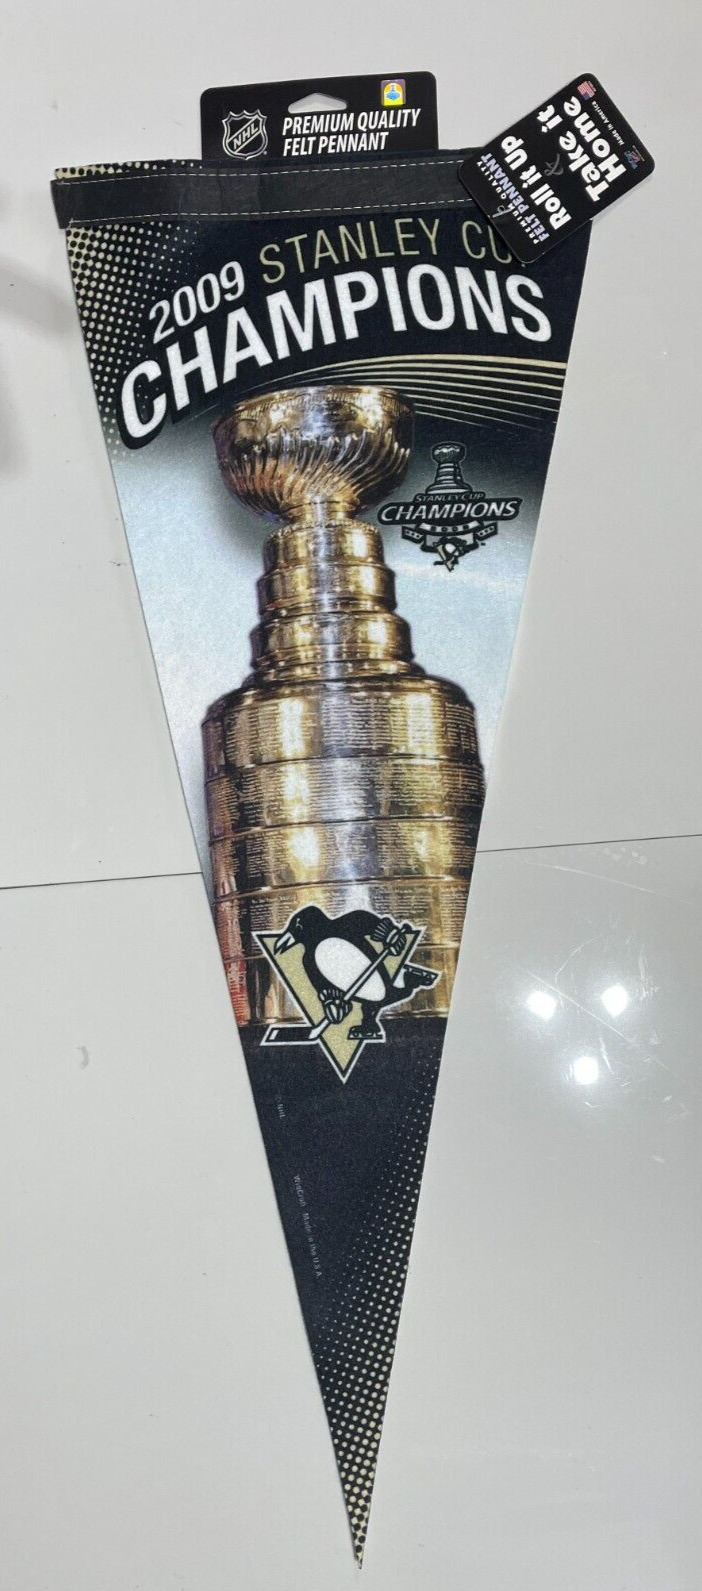 PITTSBURGH PENGUINS NHL HOCKEY 2009 STANLEY CUP CHAMP FELT PENNANT NEW/MINT